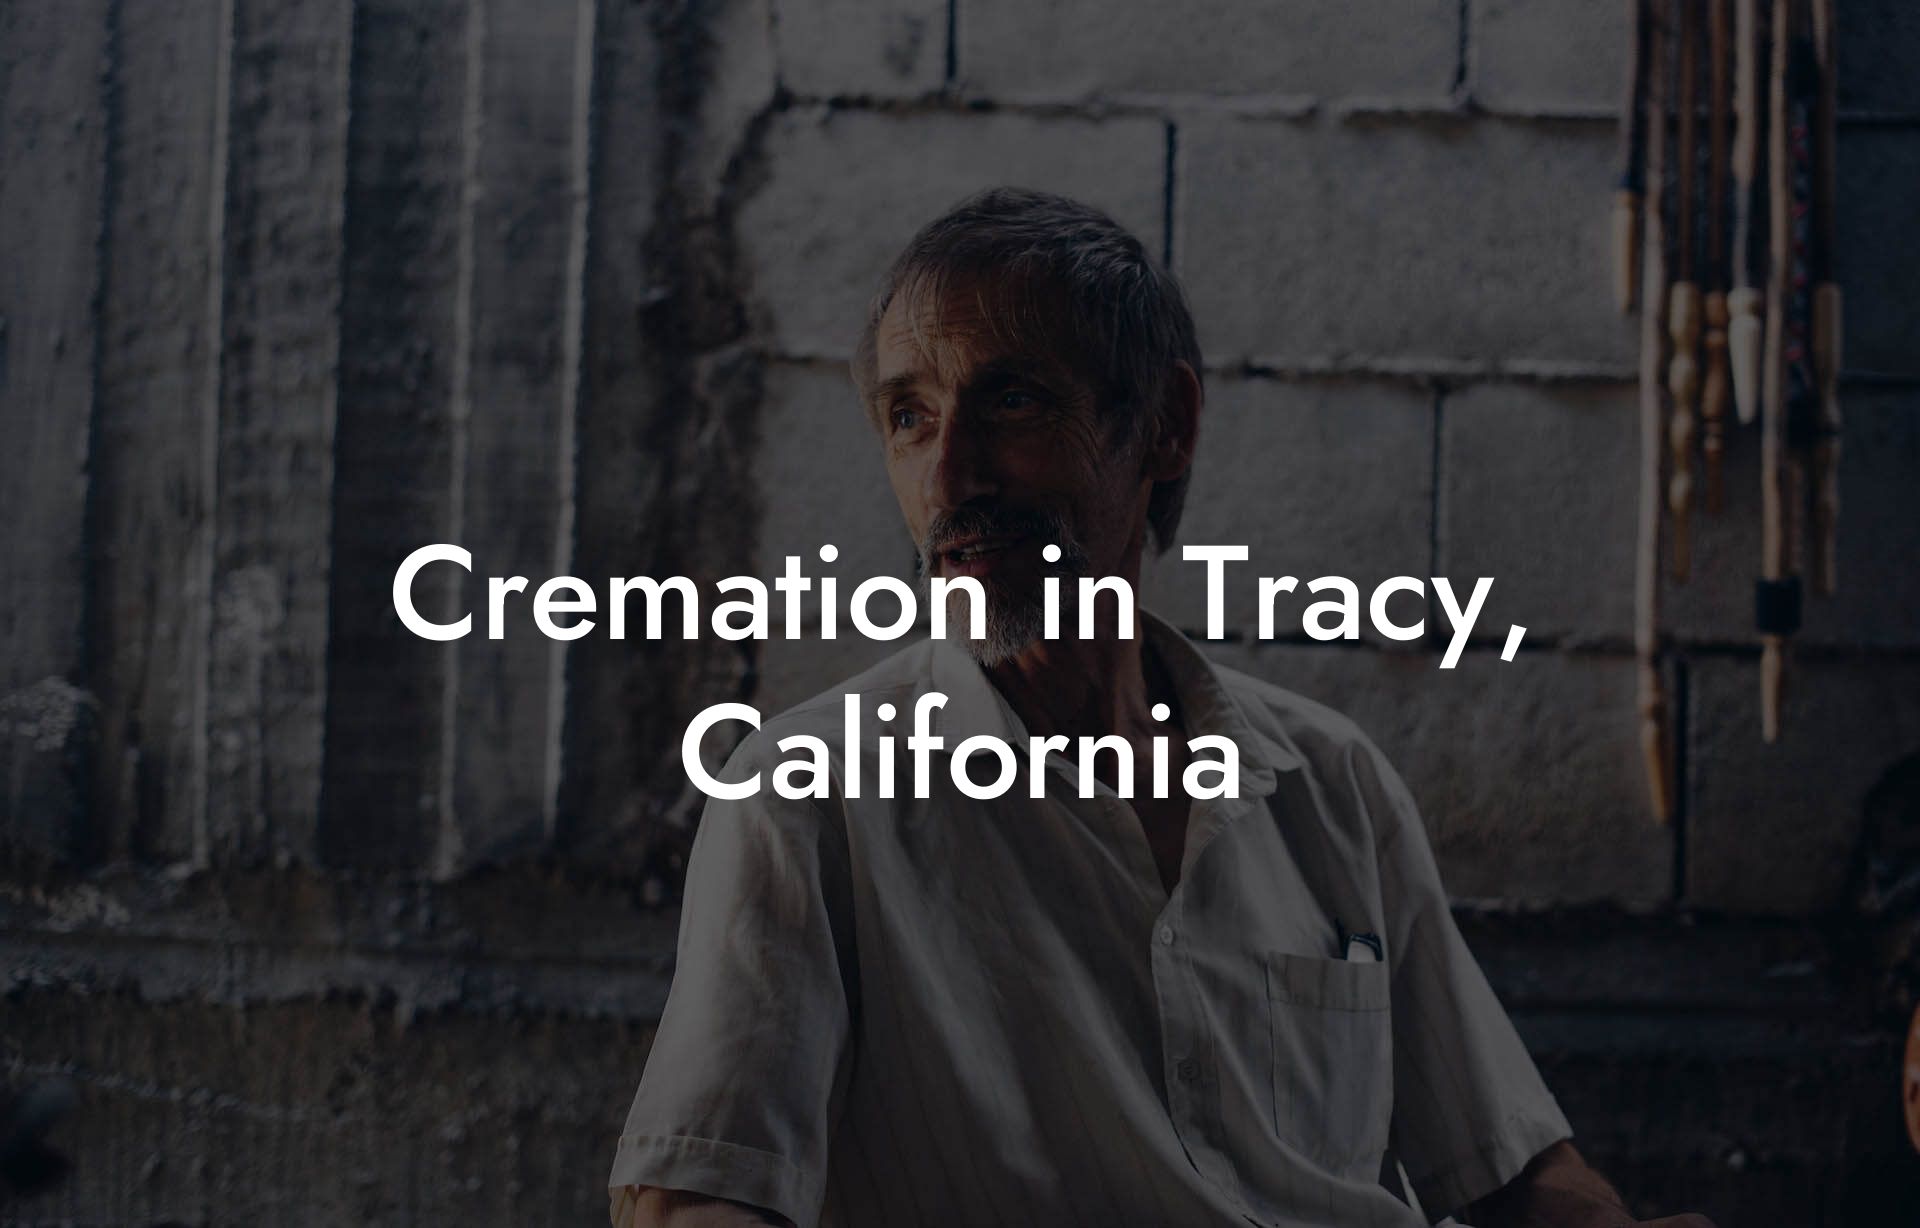 Cremation in Tracy, California